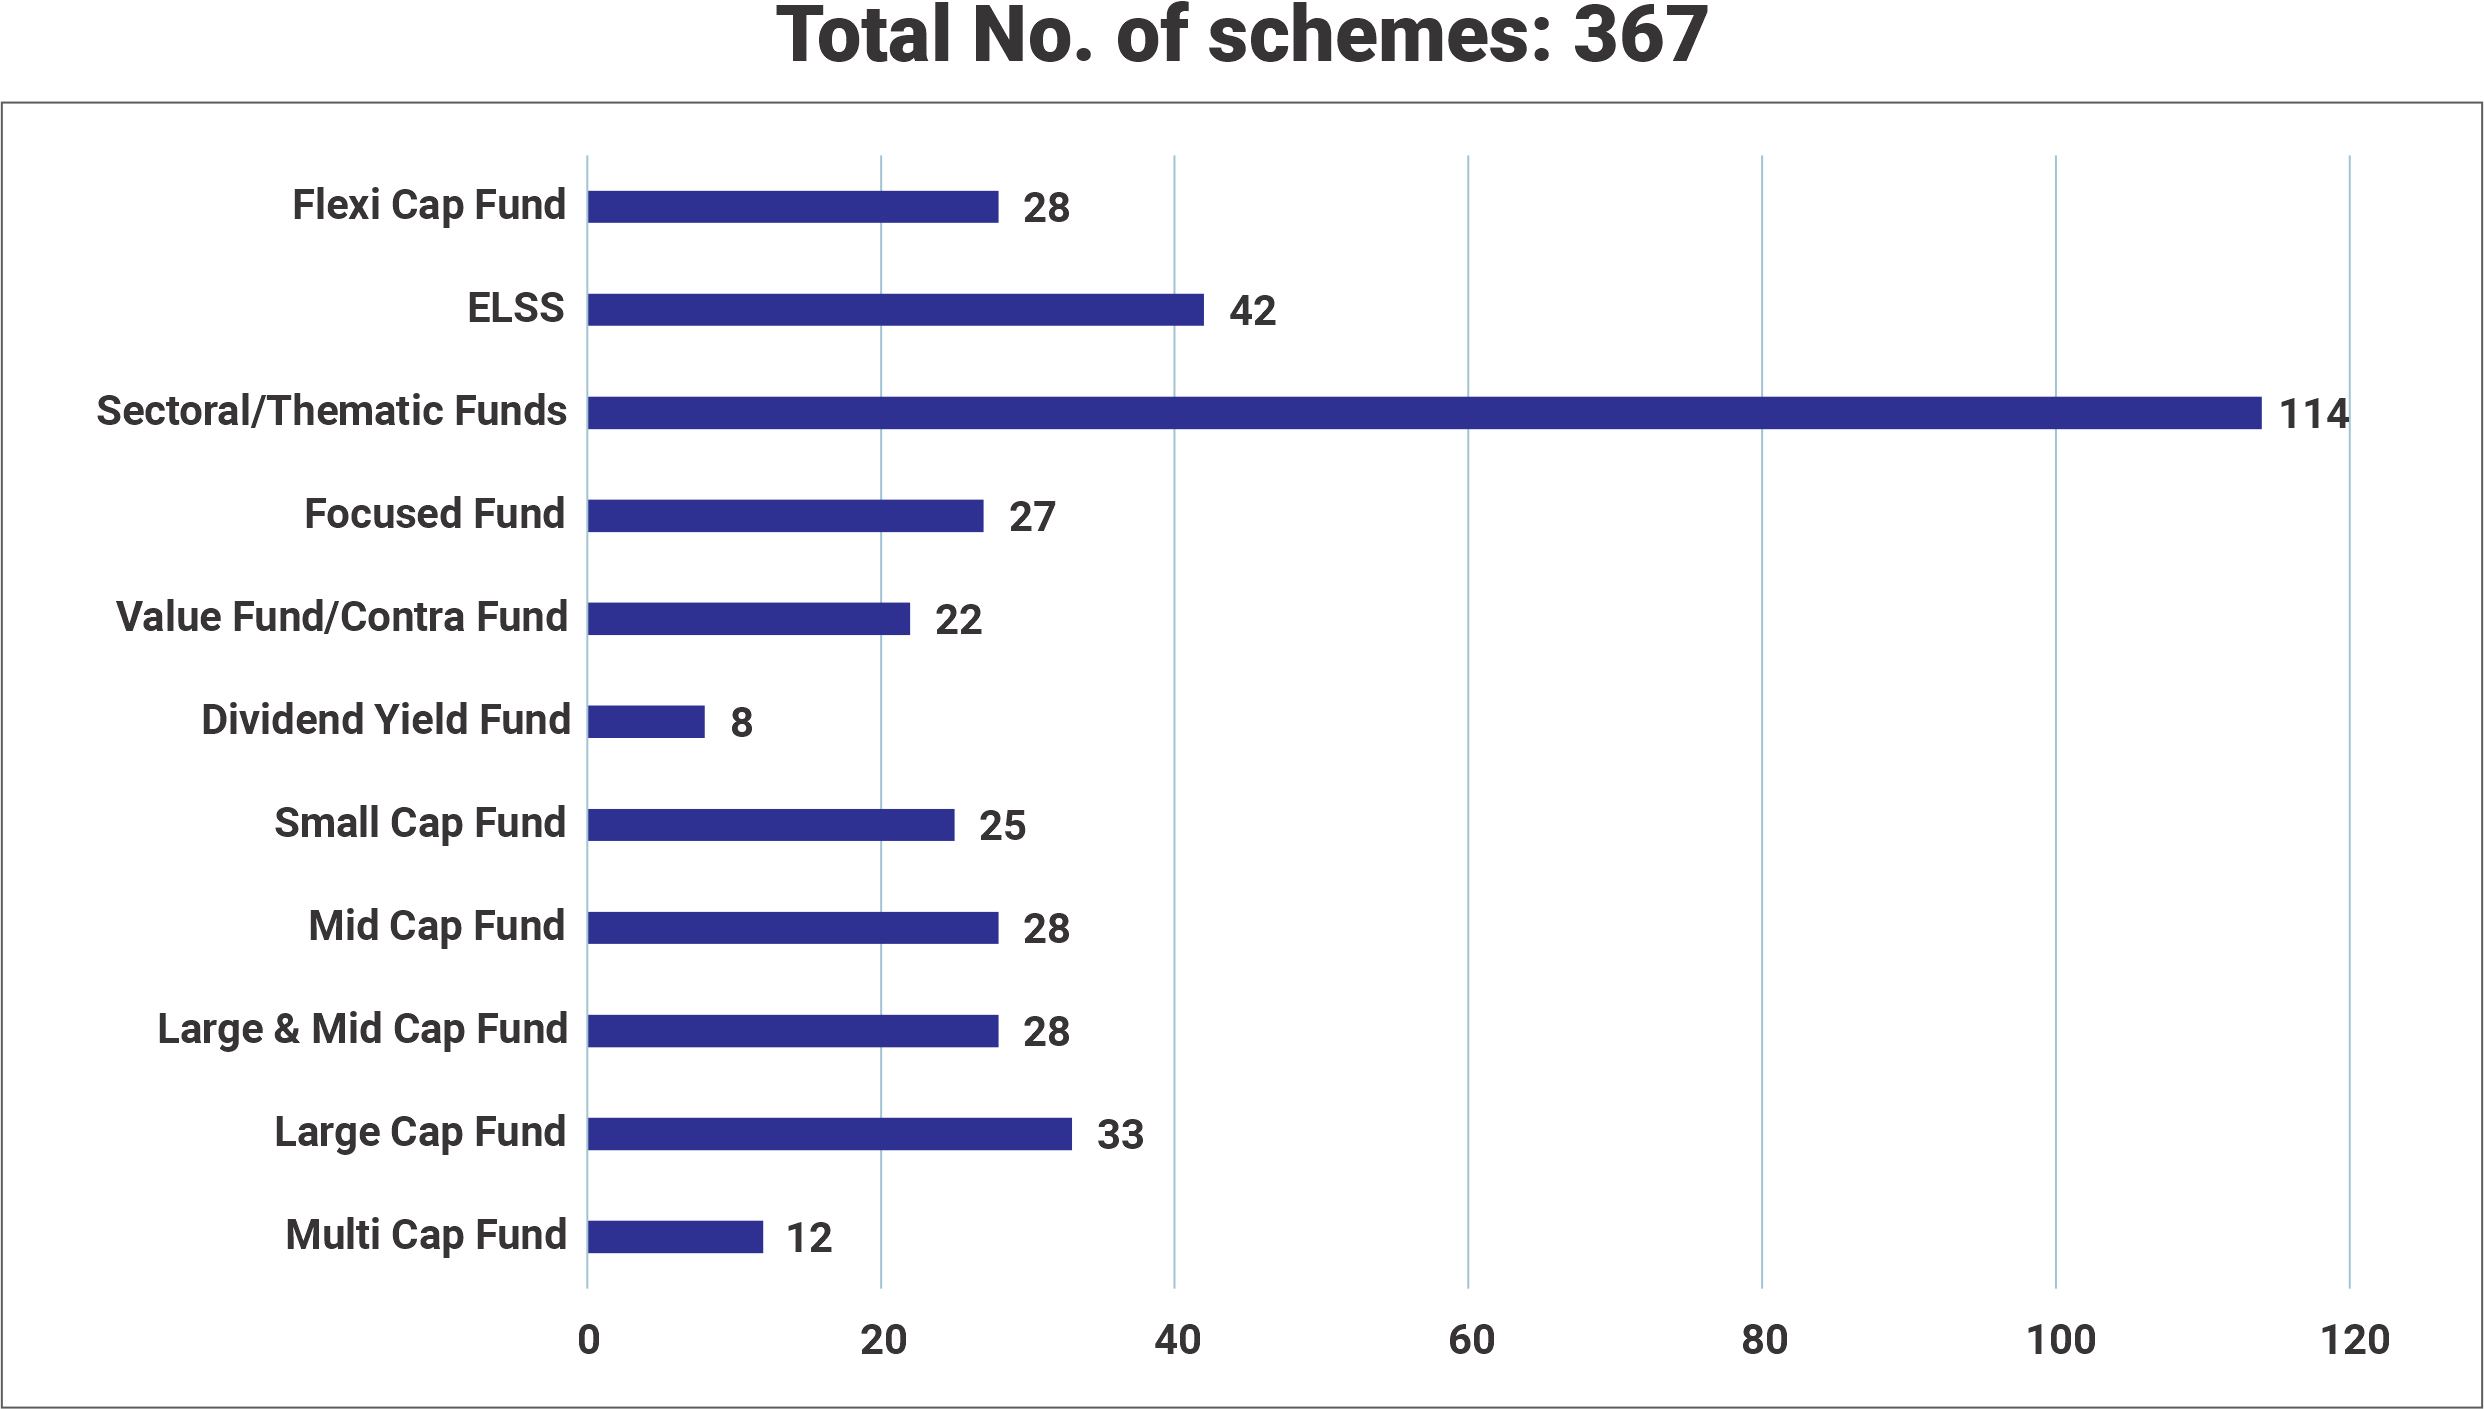 Total number of schemes